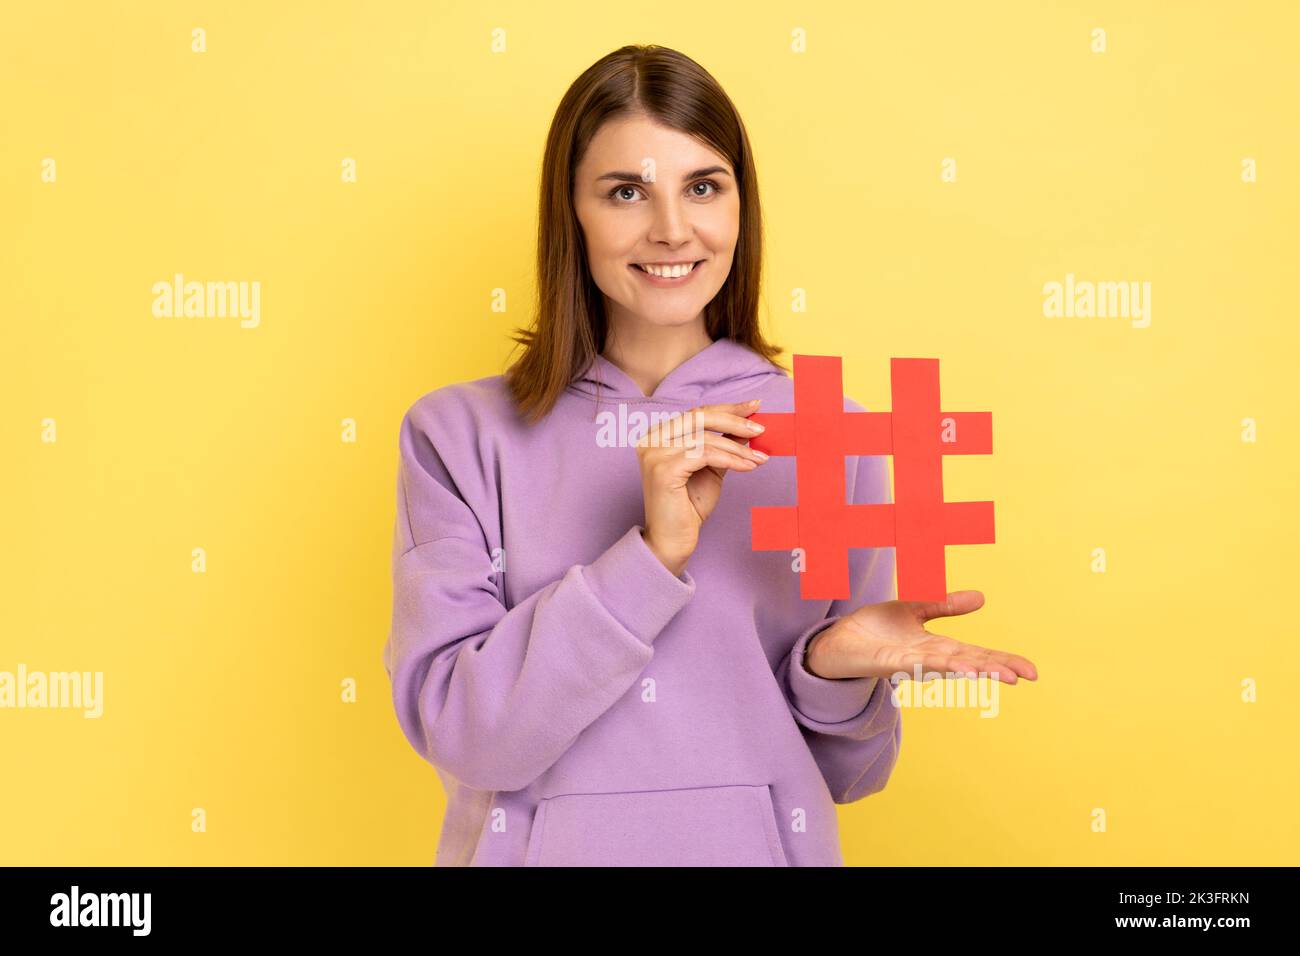 Portrait of young woman standing presenting red hashtag, tagging blog trends, viral topic in social network, wearing purple hoodie. Indoor studio shot isolated on yellow background. Stock Photo